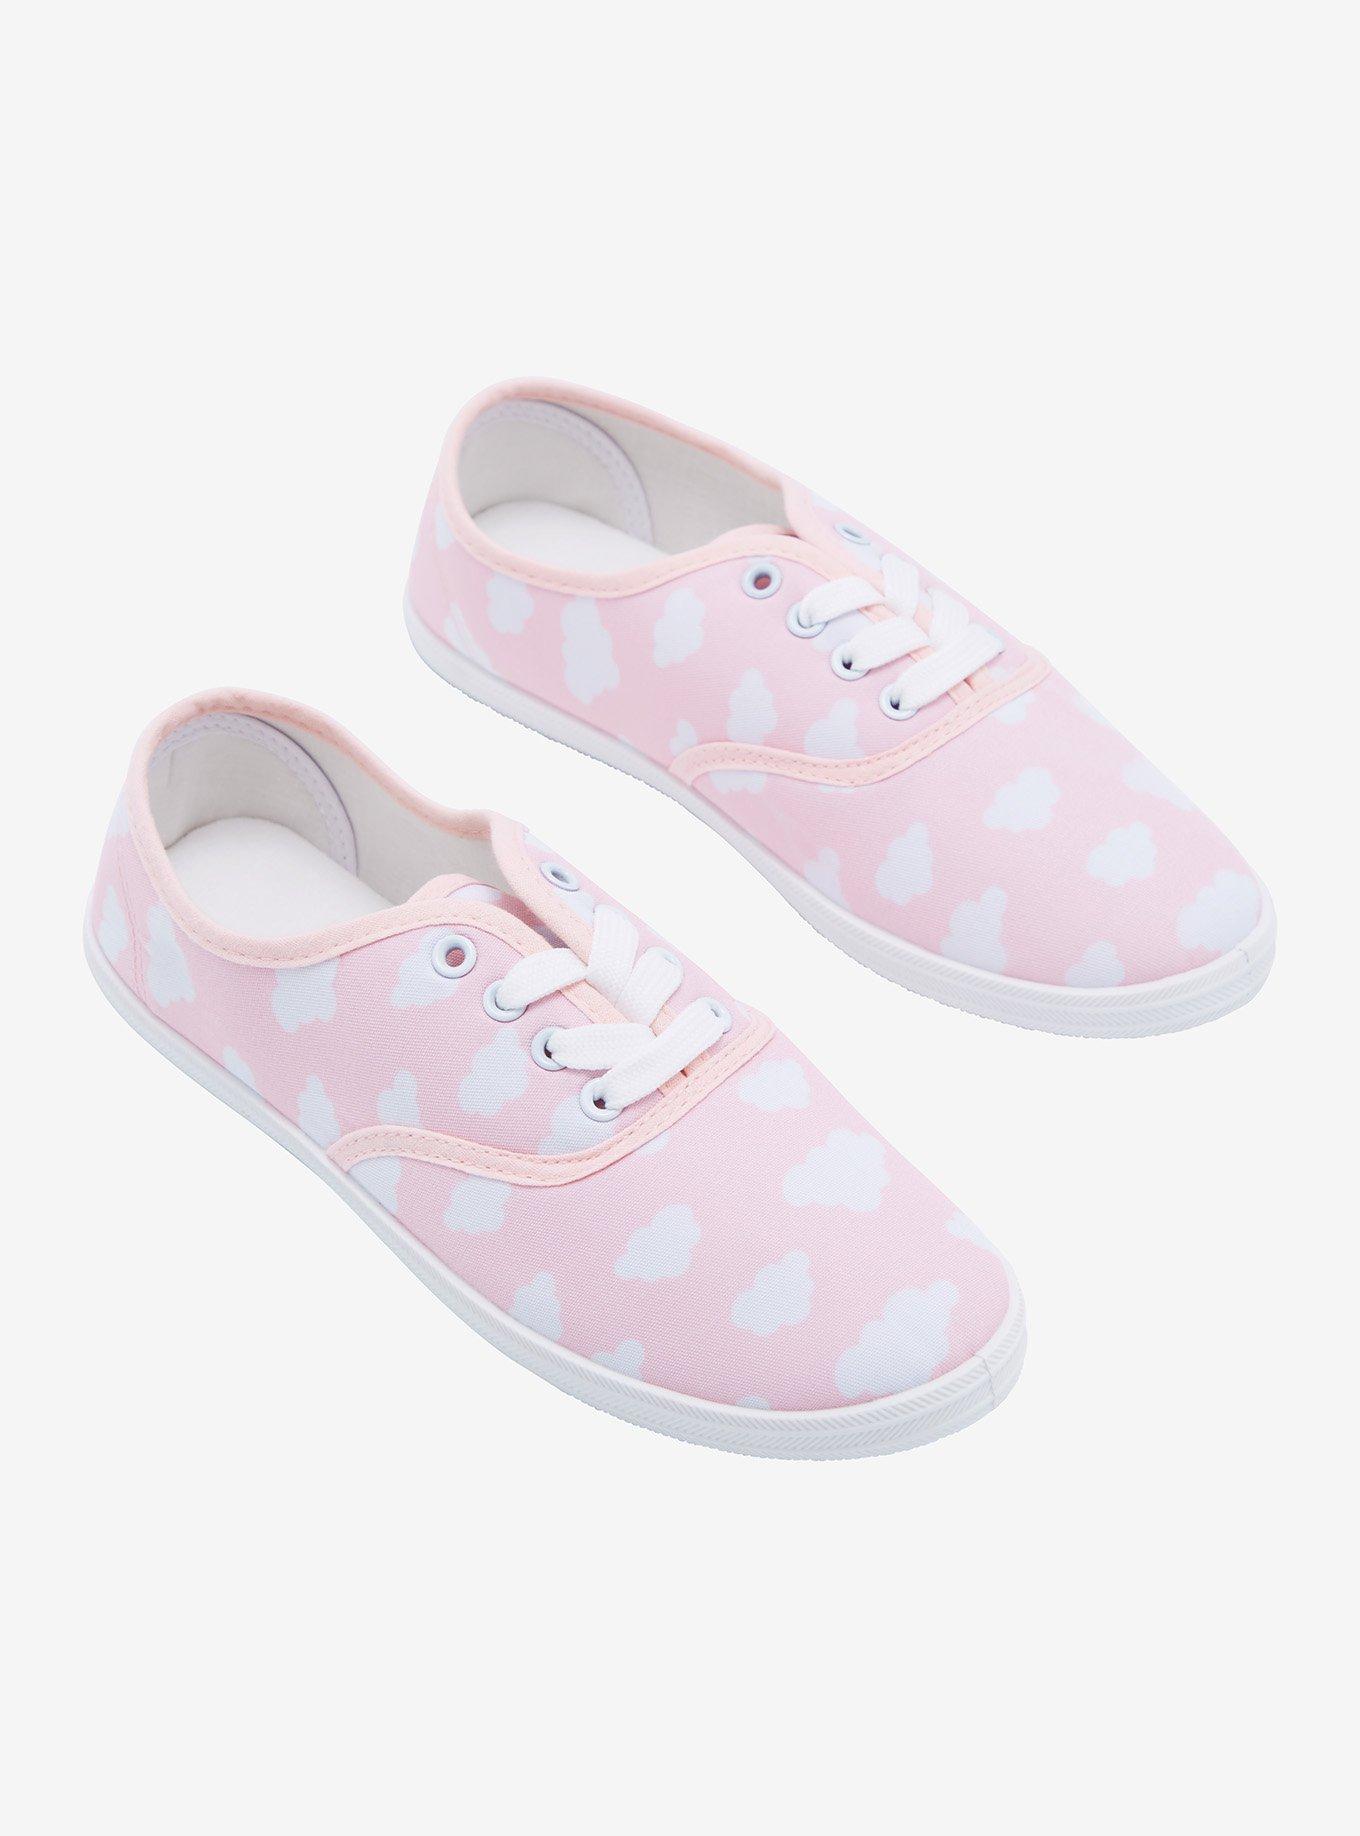 Pink Cloud Lace-Up Sneakers, MULTI, alternate